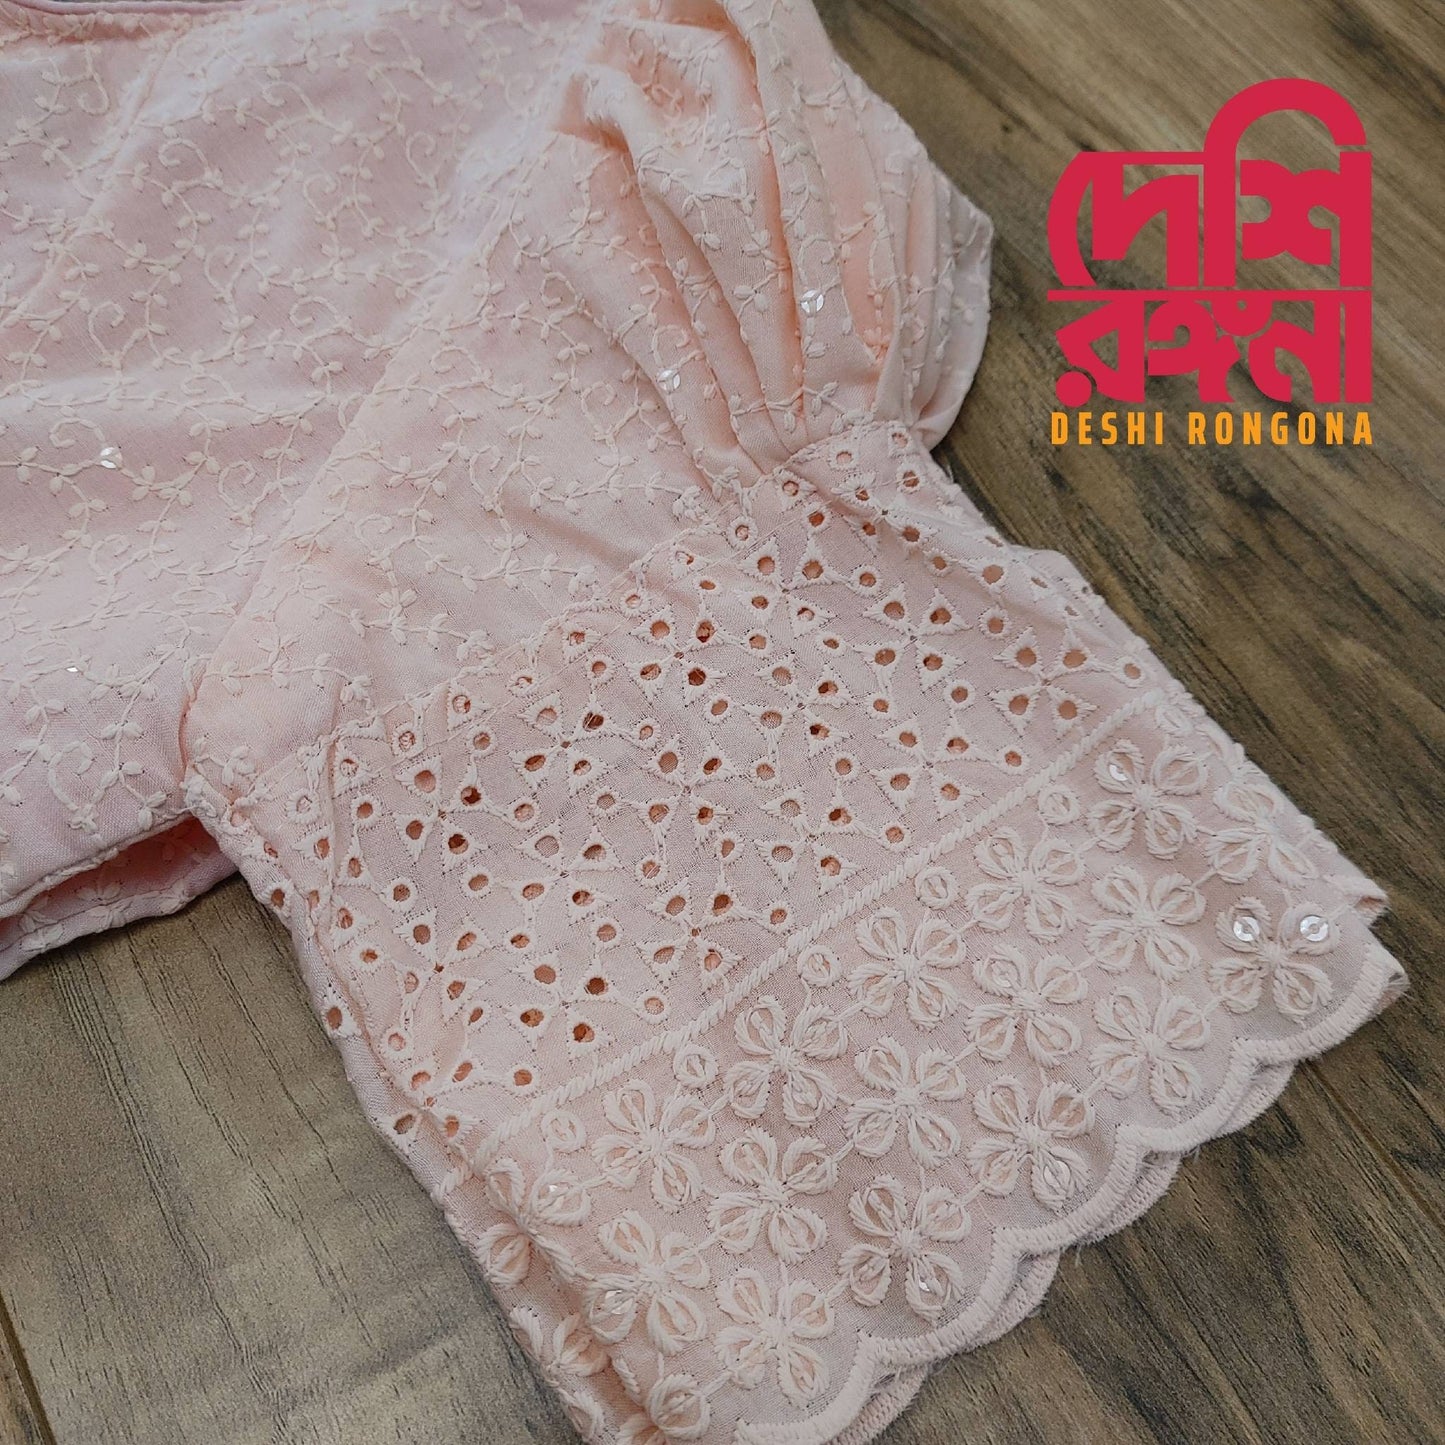 Readymade Lakhnaw Cotton Blouse, Peach Color Readymade Designer Blouse, Embroidered, Comfortable,goes with any contrast saree of your closet